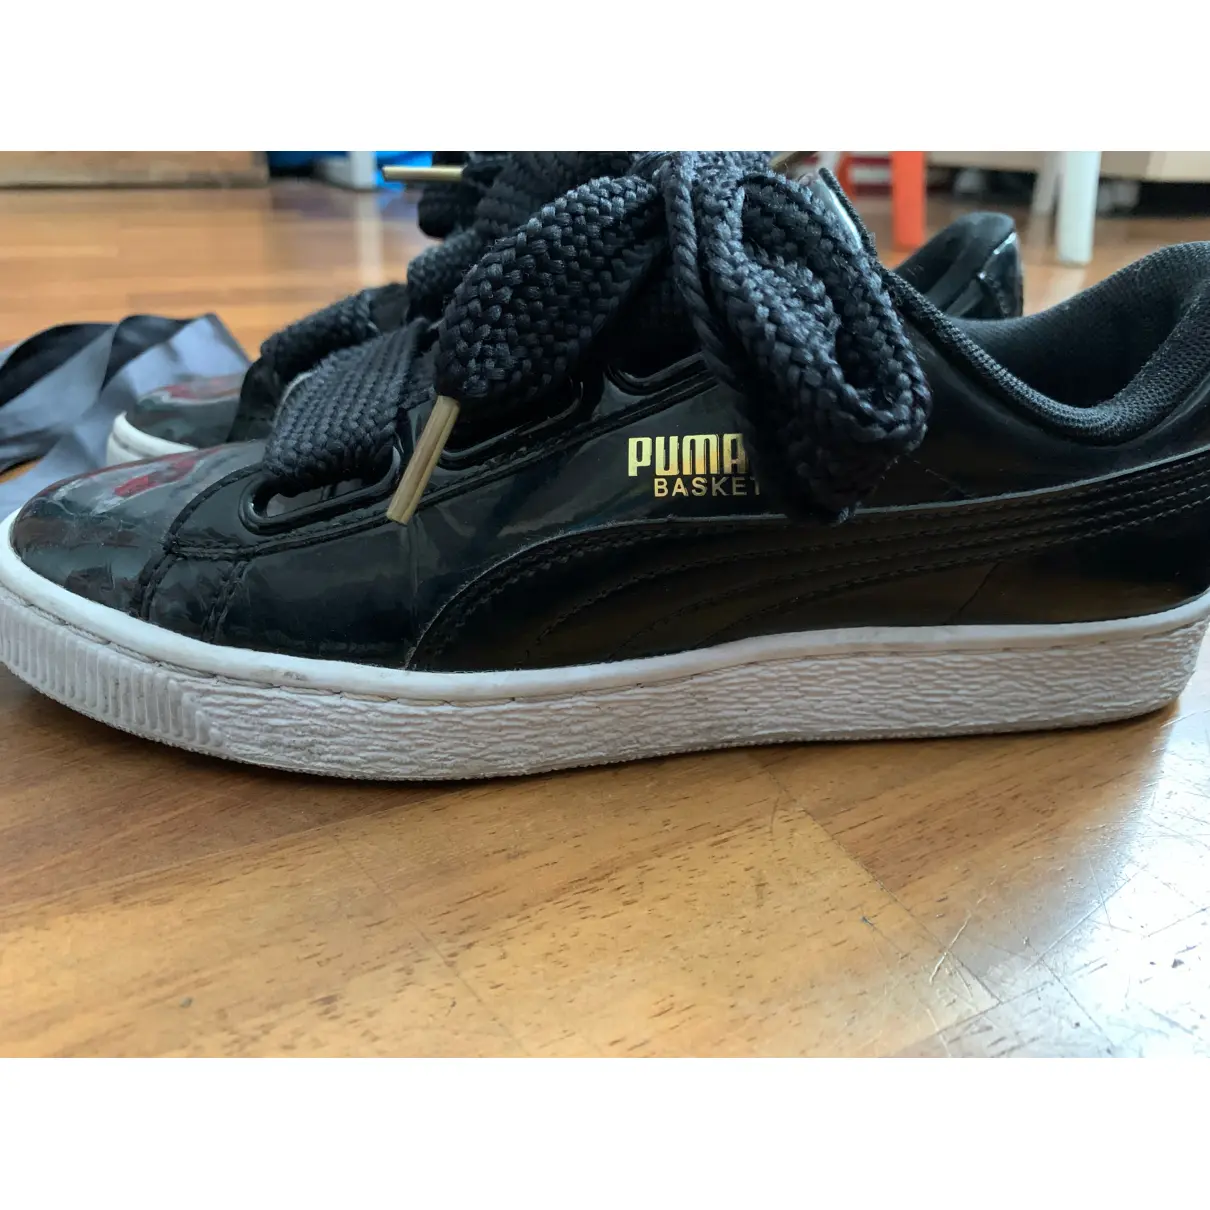 Buy Puma Patent leather trainers online